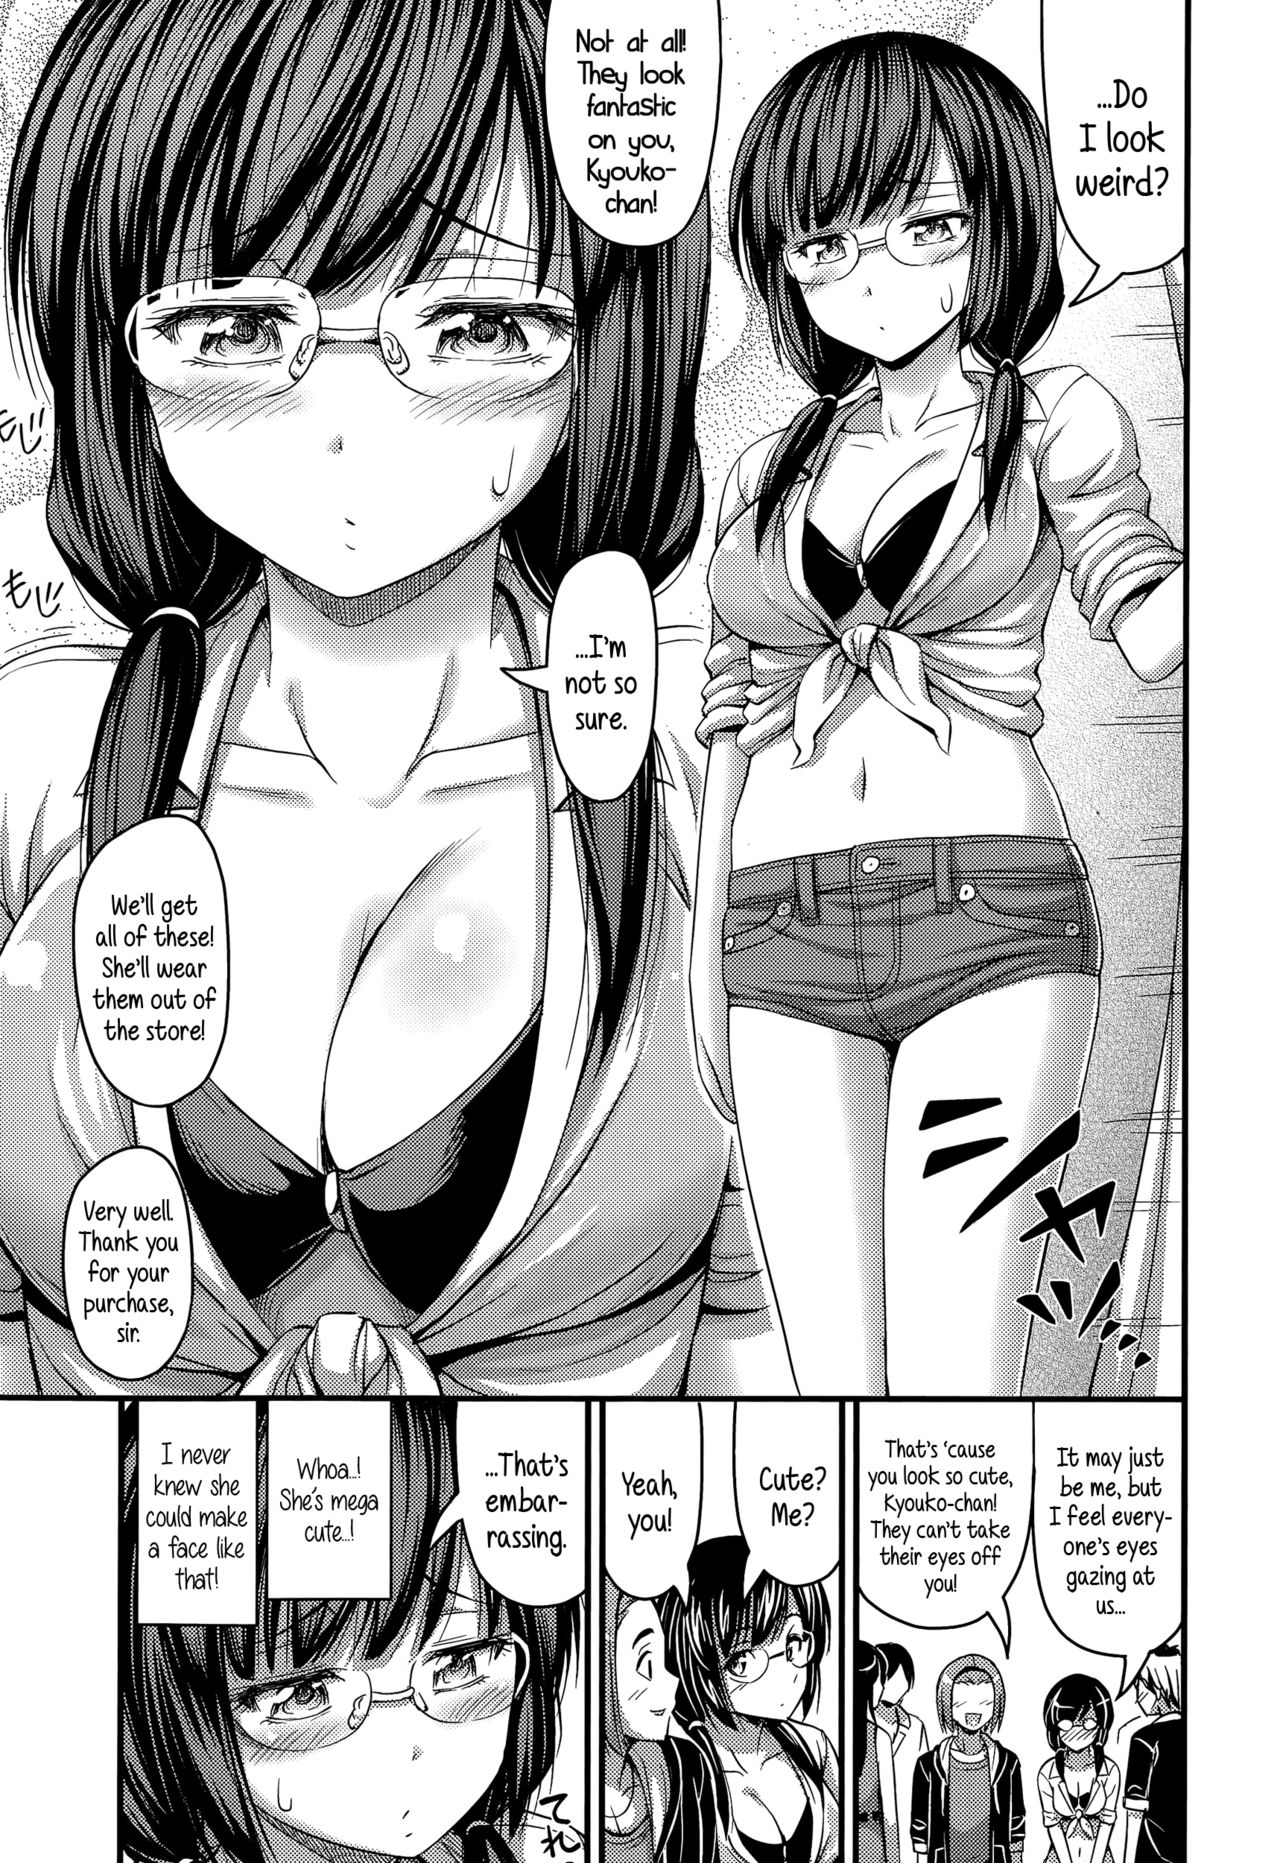 [Noise] Charao to Megane | Tomcat & Glasses (COMIC LO 2015-08) [English] {5 a.m.} 2